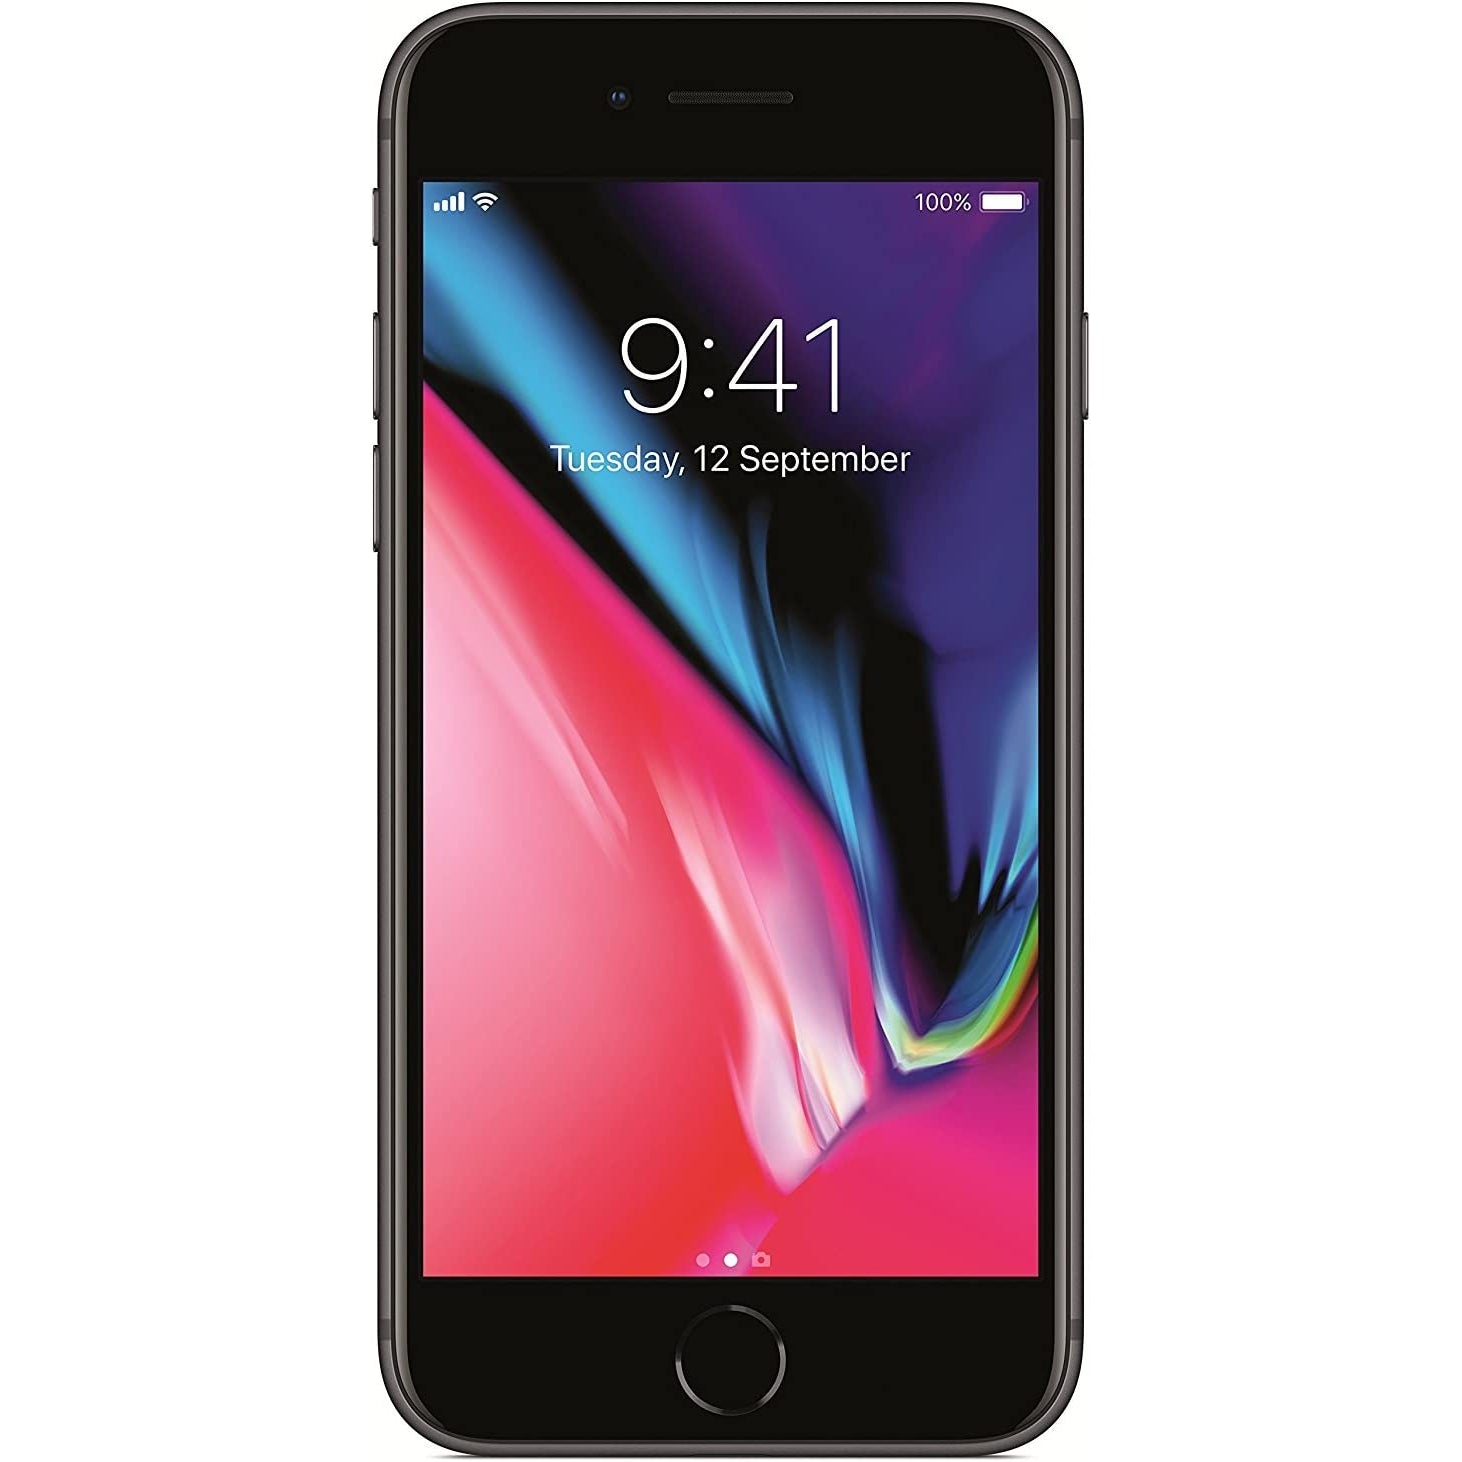 Apple iPhone 8 Plus 64GB Space Grey, Silver, Gold or Red Unlocked - Go